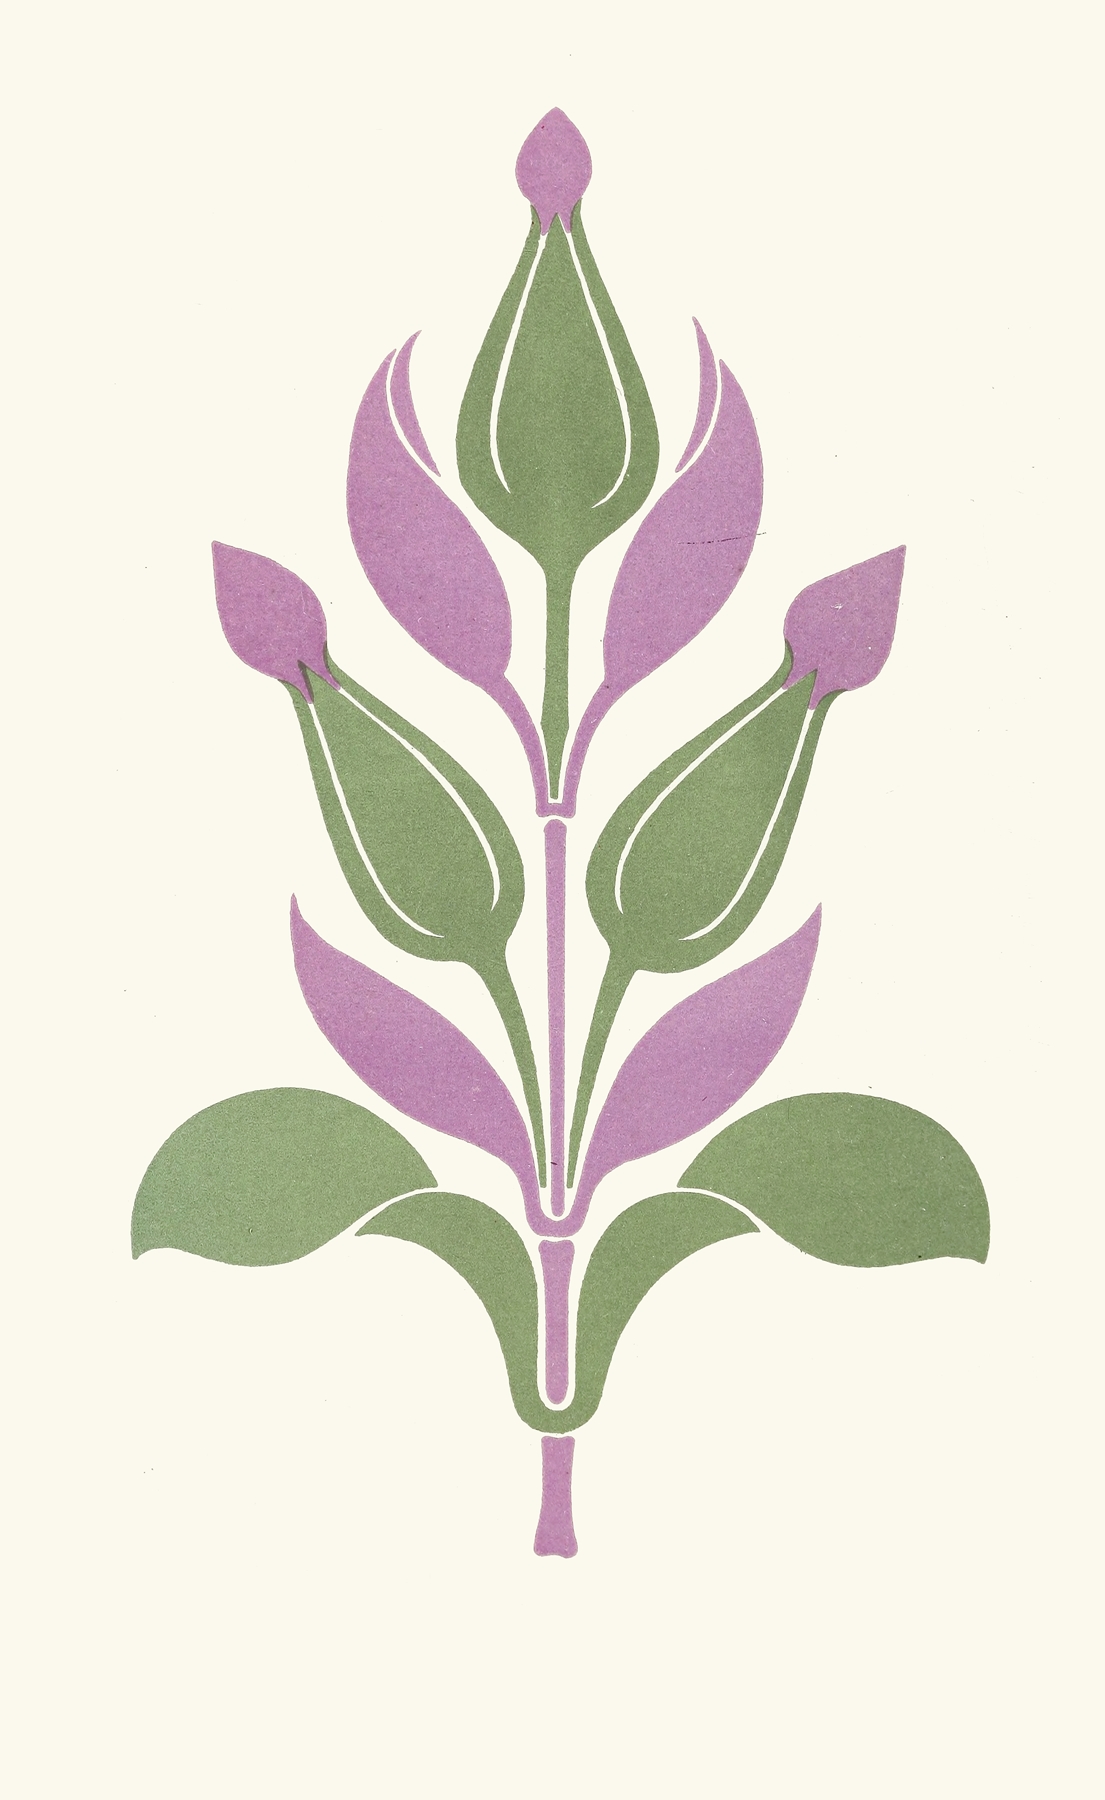 Agreeable Contrast of Plum-Violet and Sage-Green 썸네일